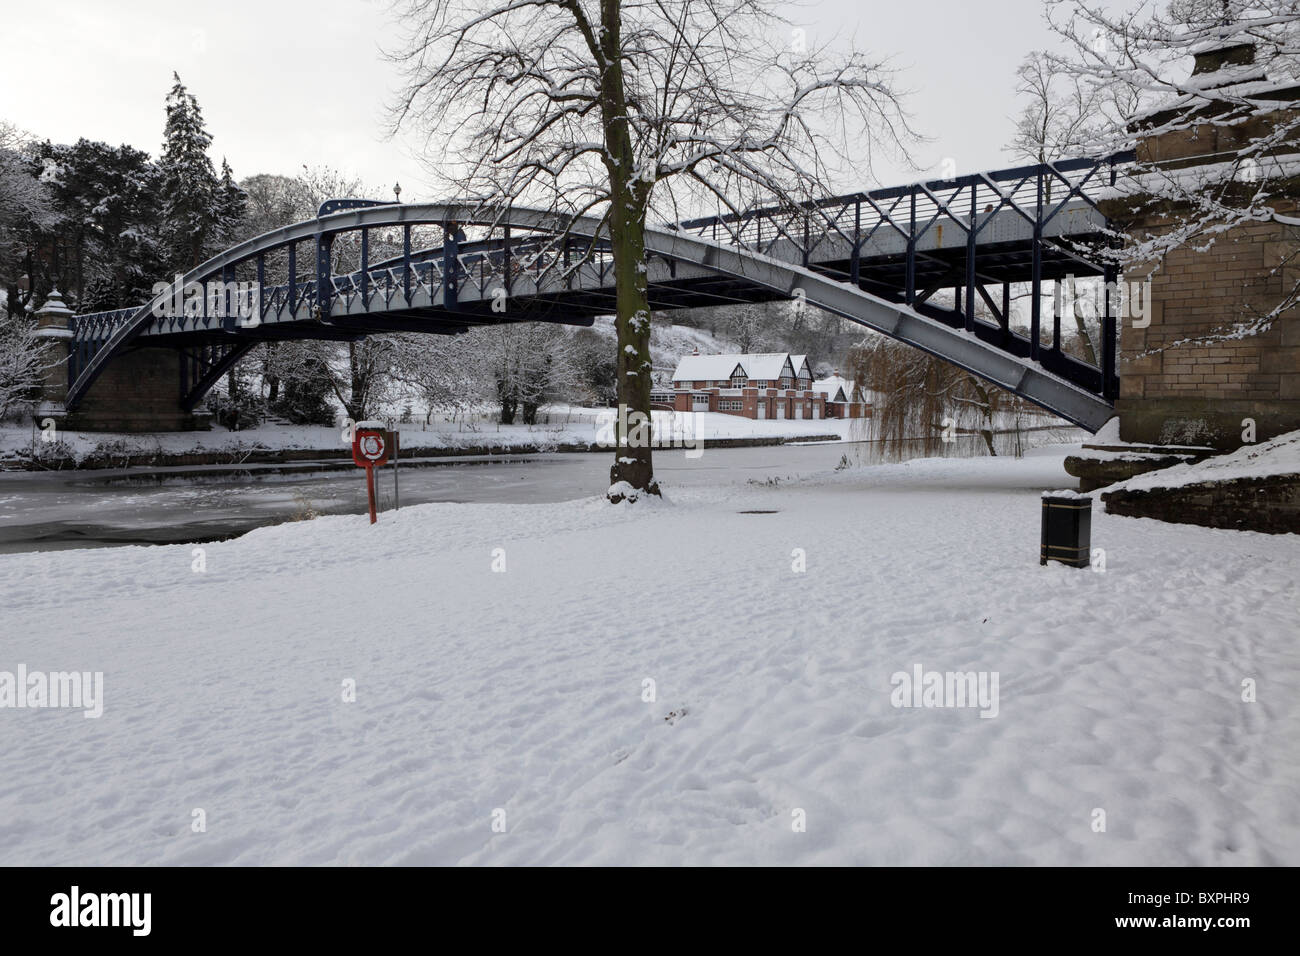 Arctic conditions adorn this image of Kingsland Toll Bridge, viewed from The Quarry side of the River Severn in Shrewsbury. Stock Photo